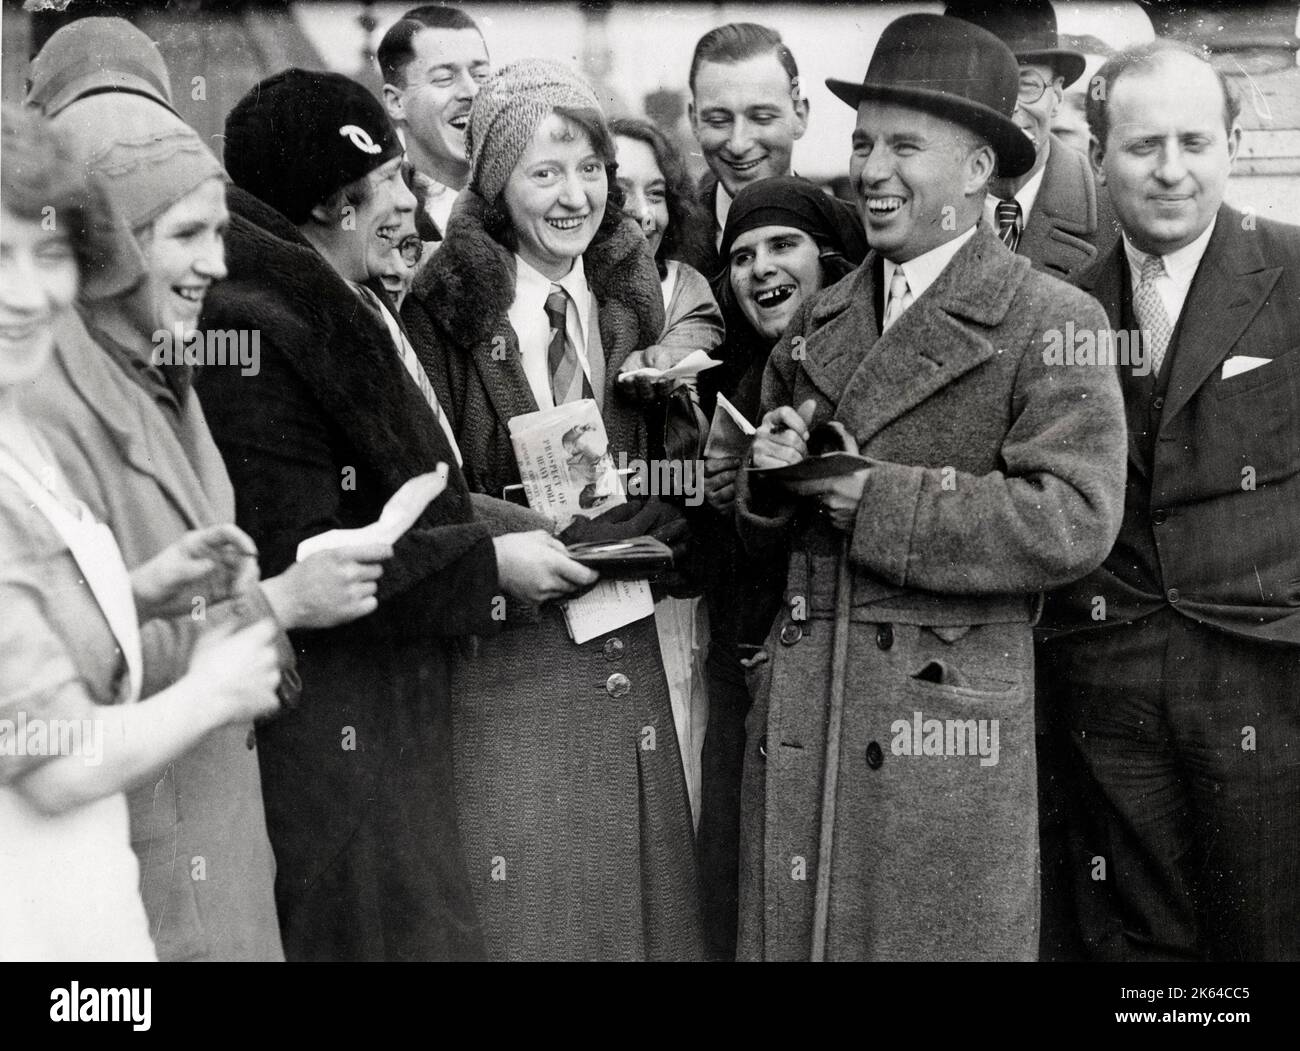 Actor Charlie Chaplin on his return to the UK in 1931, see signing autographs Stock Photo